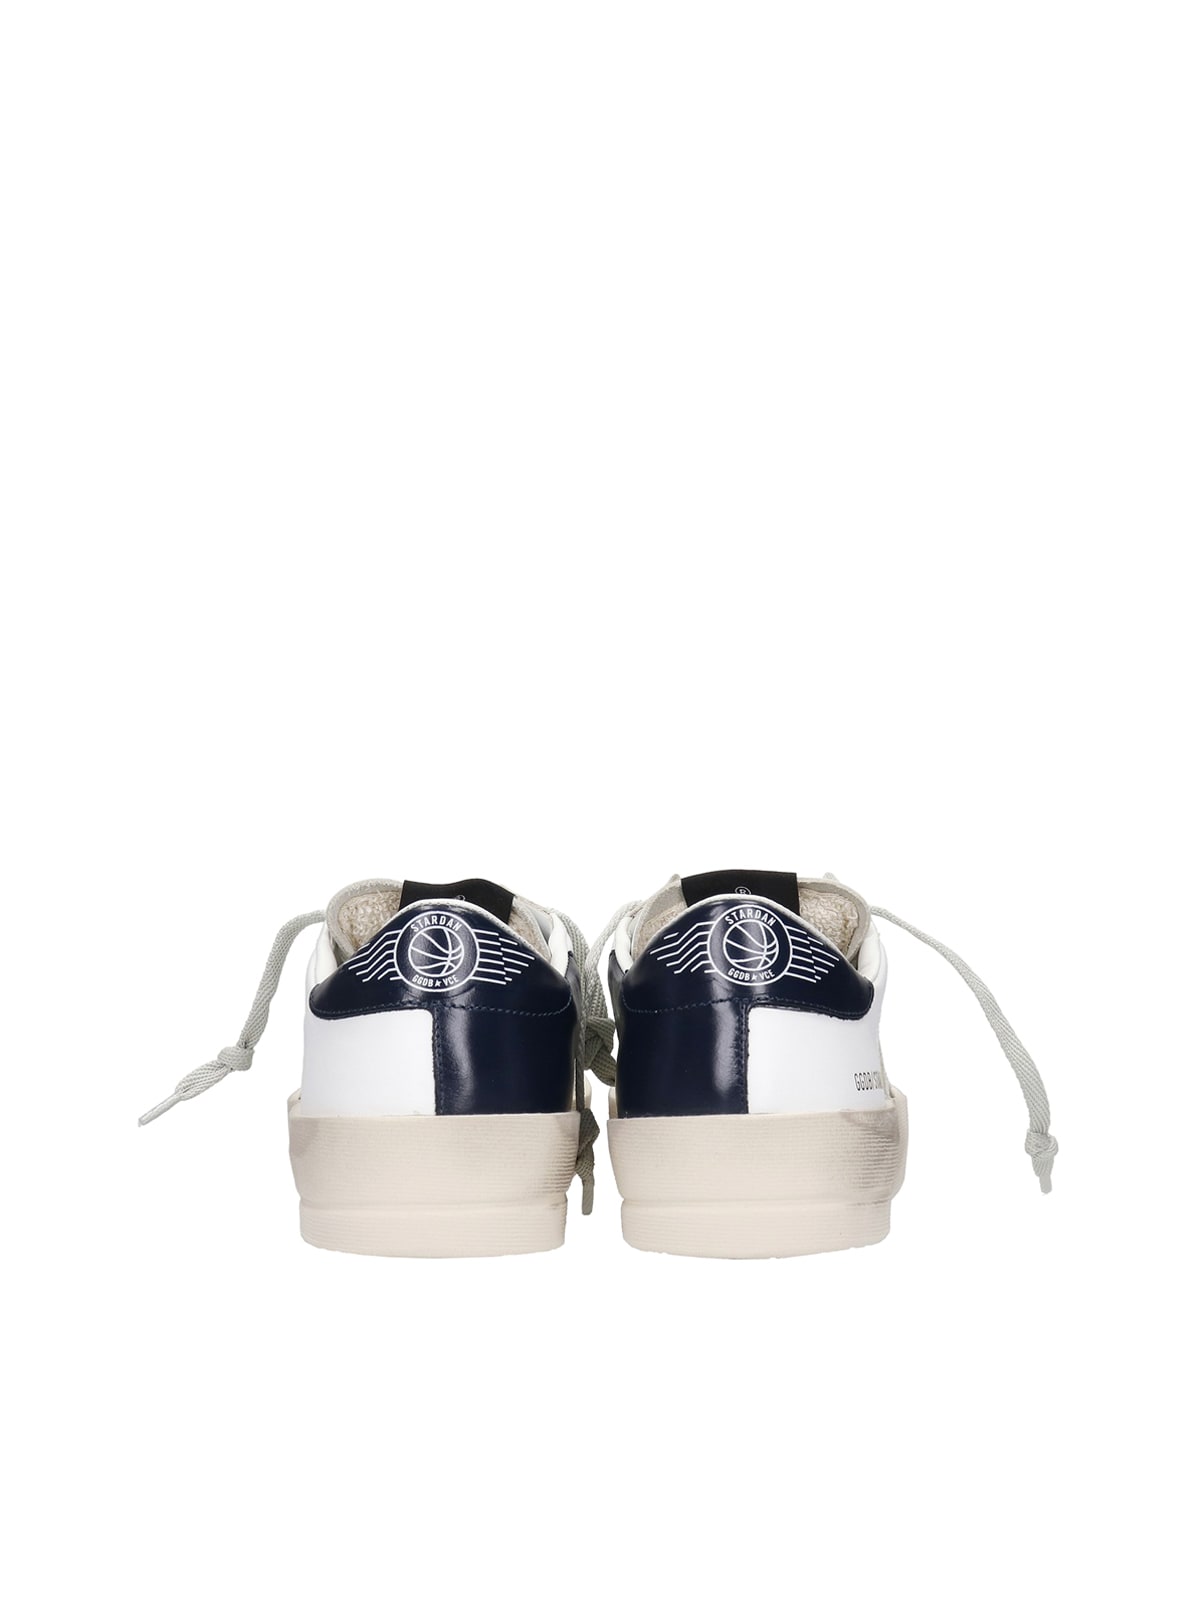 Shop Golden Goose Stardan Leather Upper Suede Star Shiny Leather Heel In White Ice Blue